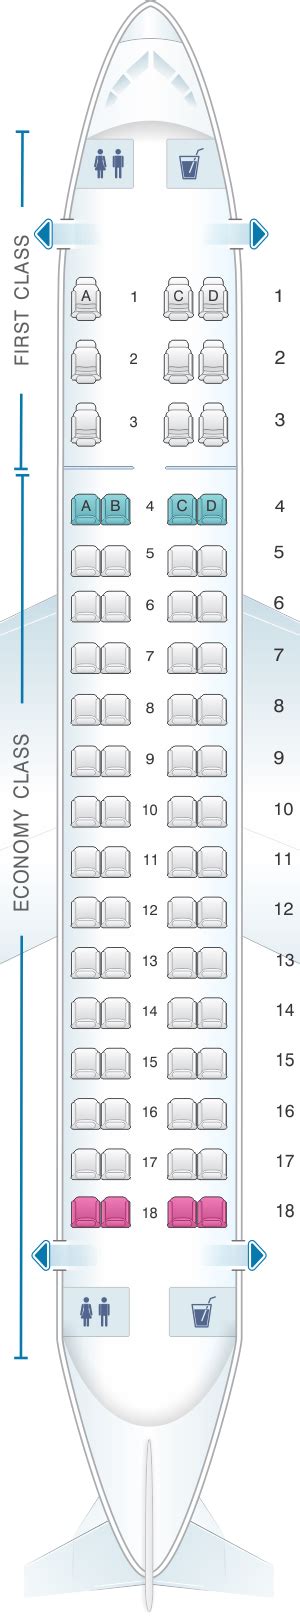 Seat 1D is a standard first class aisle seat with 94cm 37" of seat pitch, which is average across Embraer 170's worldwide. 1D is positioned at the bulkhead, which means that no seat can recline into your space, but it may mean limited legroom for taller travelers, and there is no under-seat stowage during takeoff and landing.. 